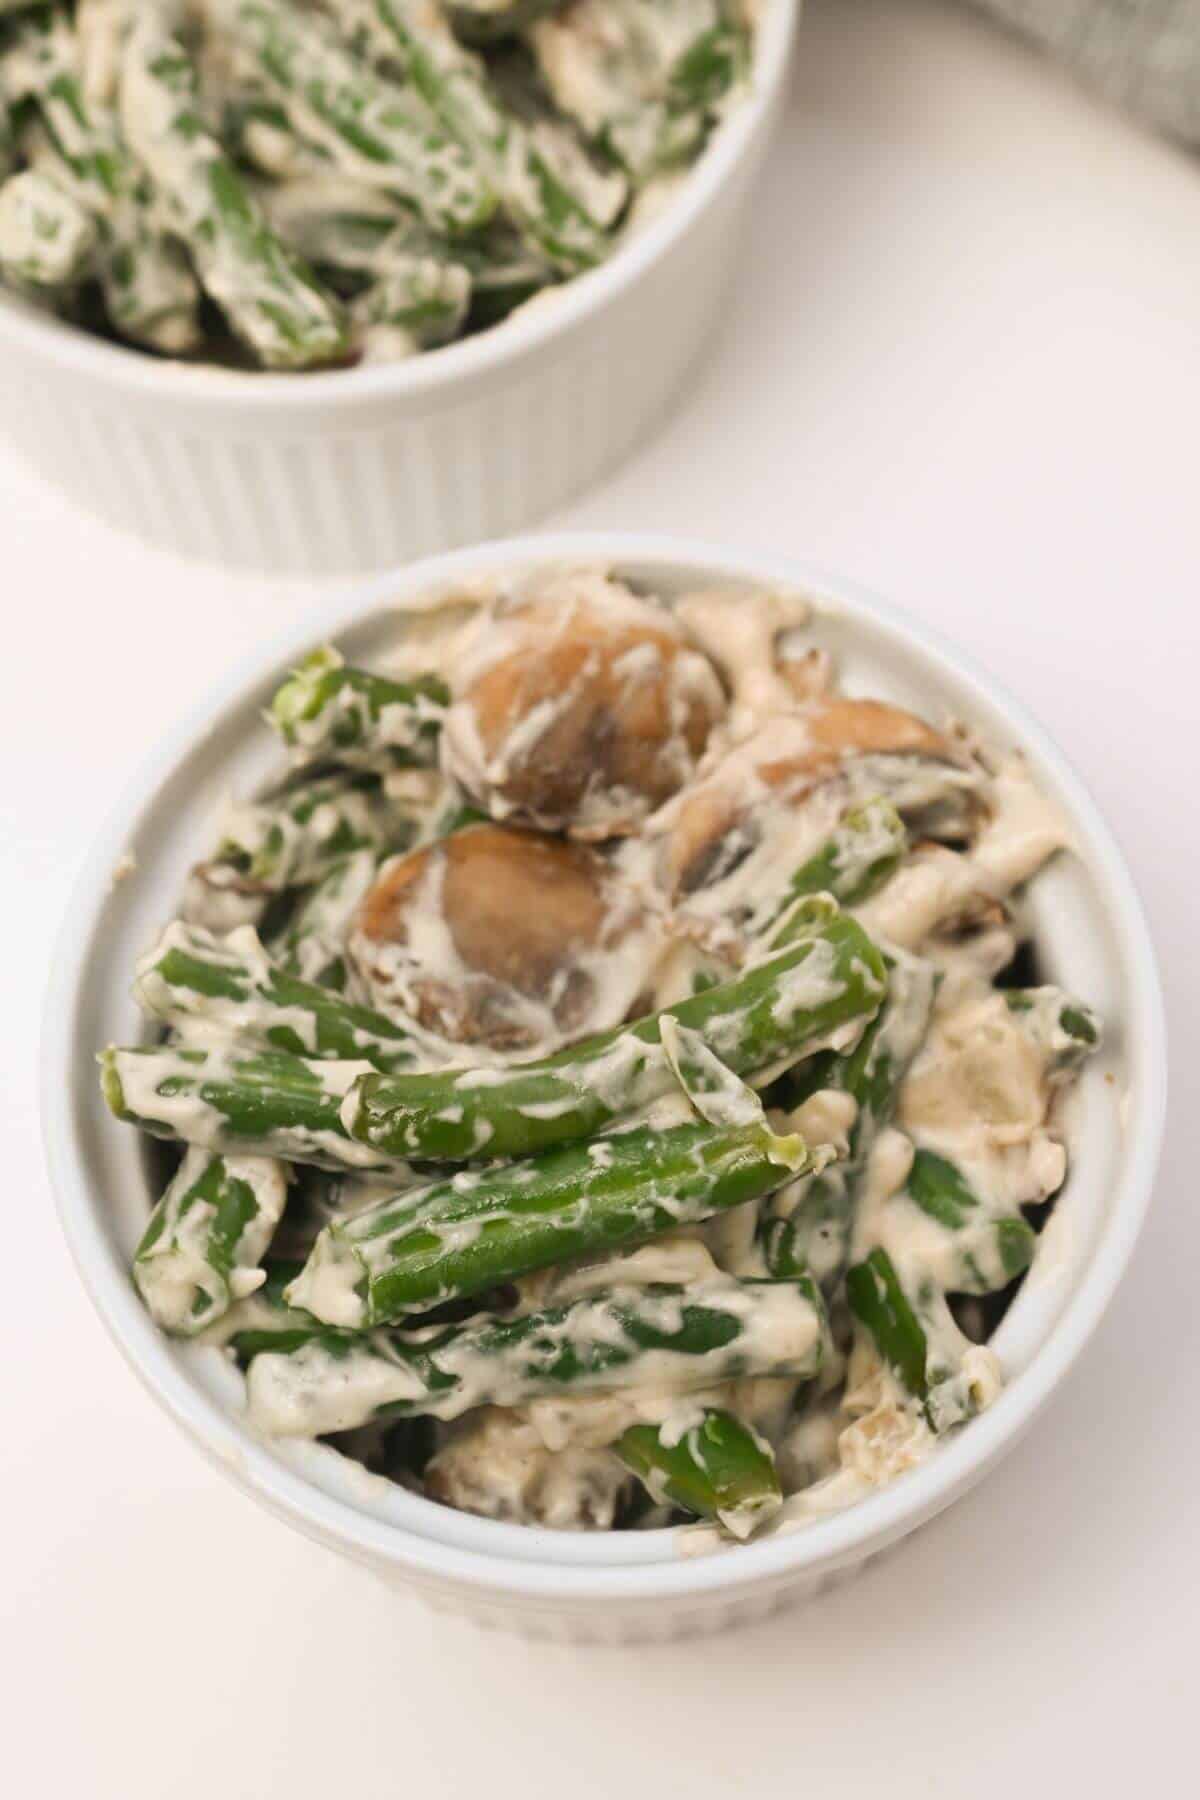 Green beans and mushrooms in a white bowl.